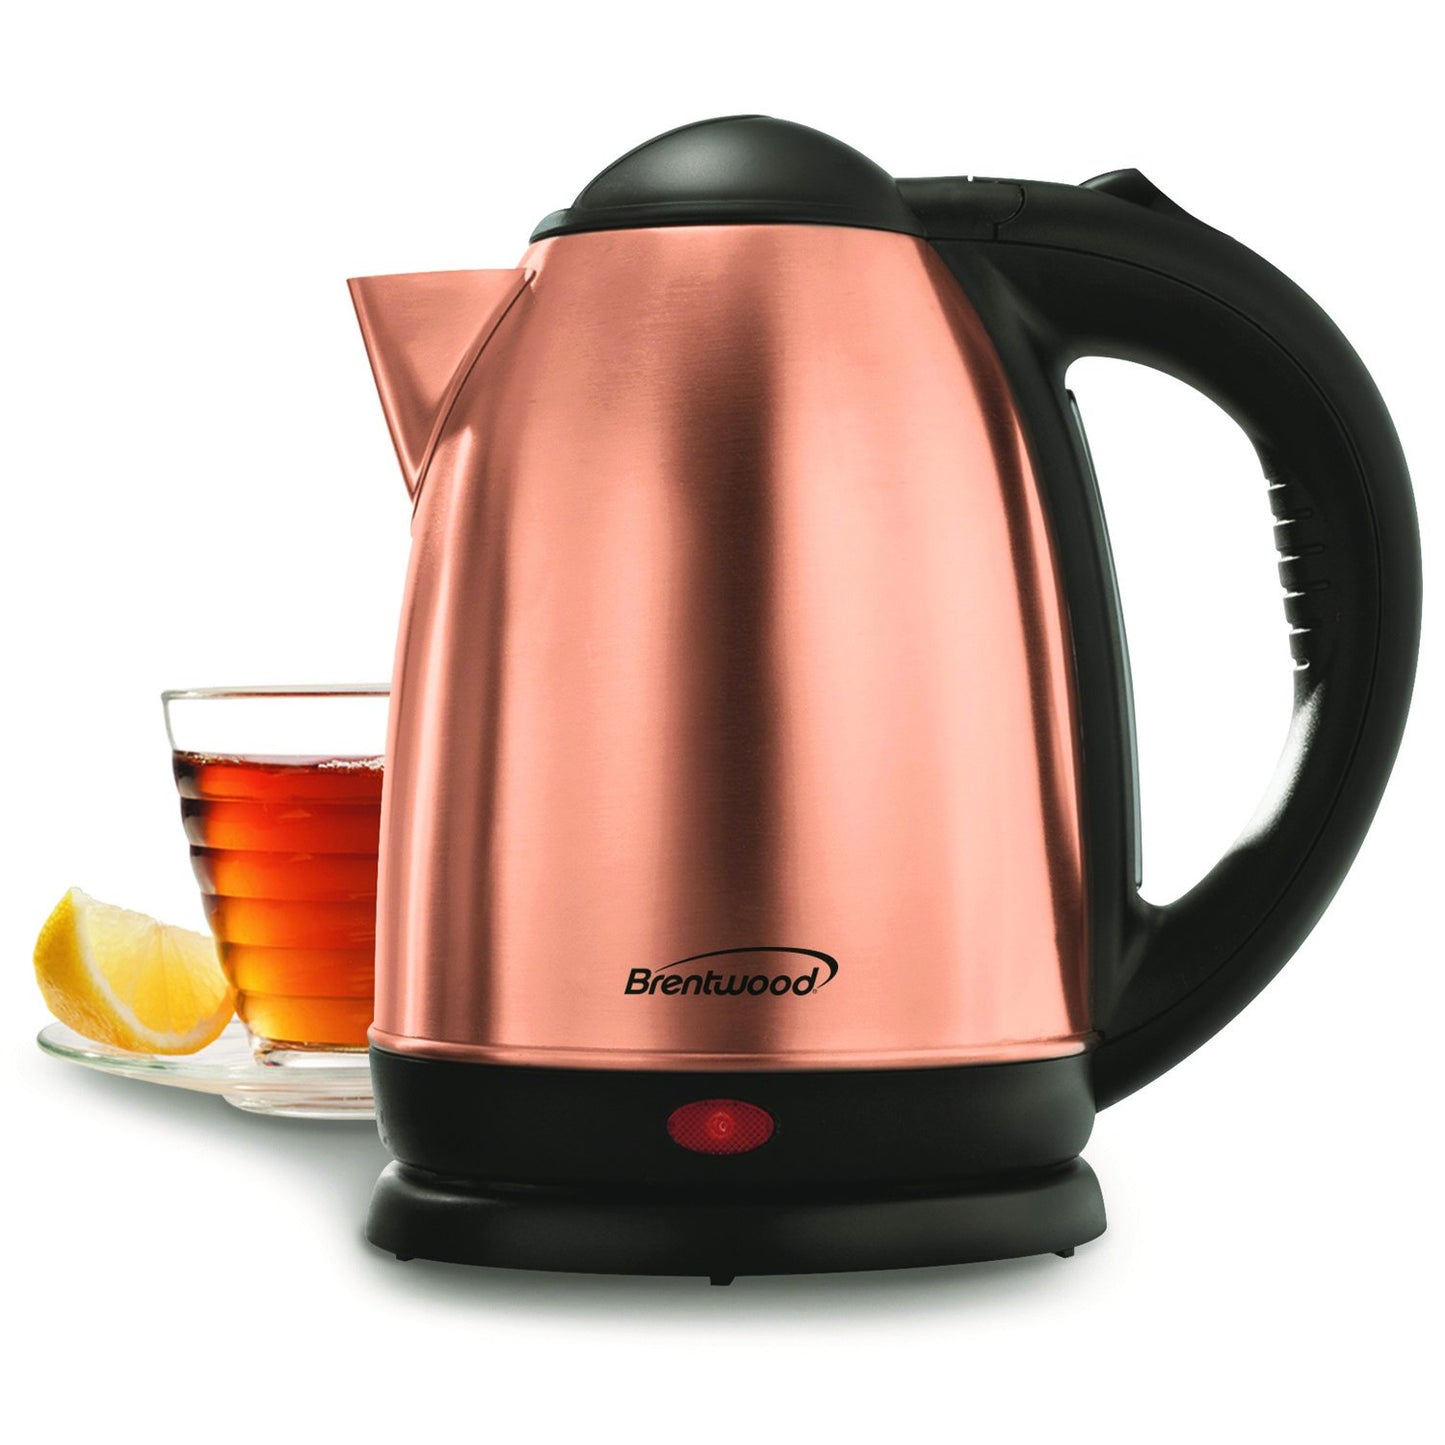 Brentwood Appl. KT-1790RG 1.7L Stainless Steel Cordless Electric Kettle